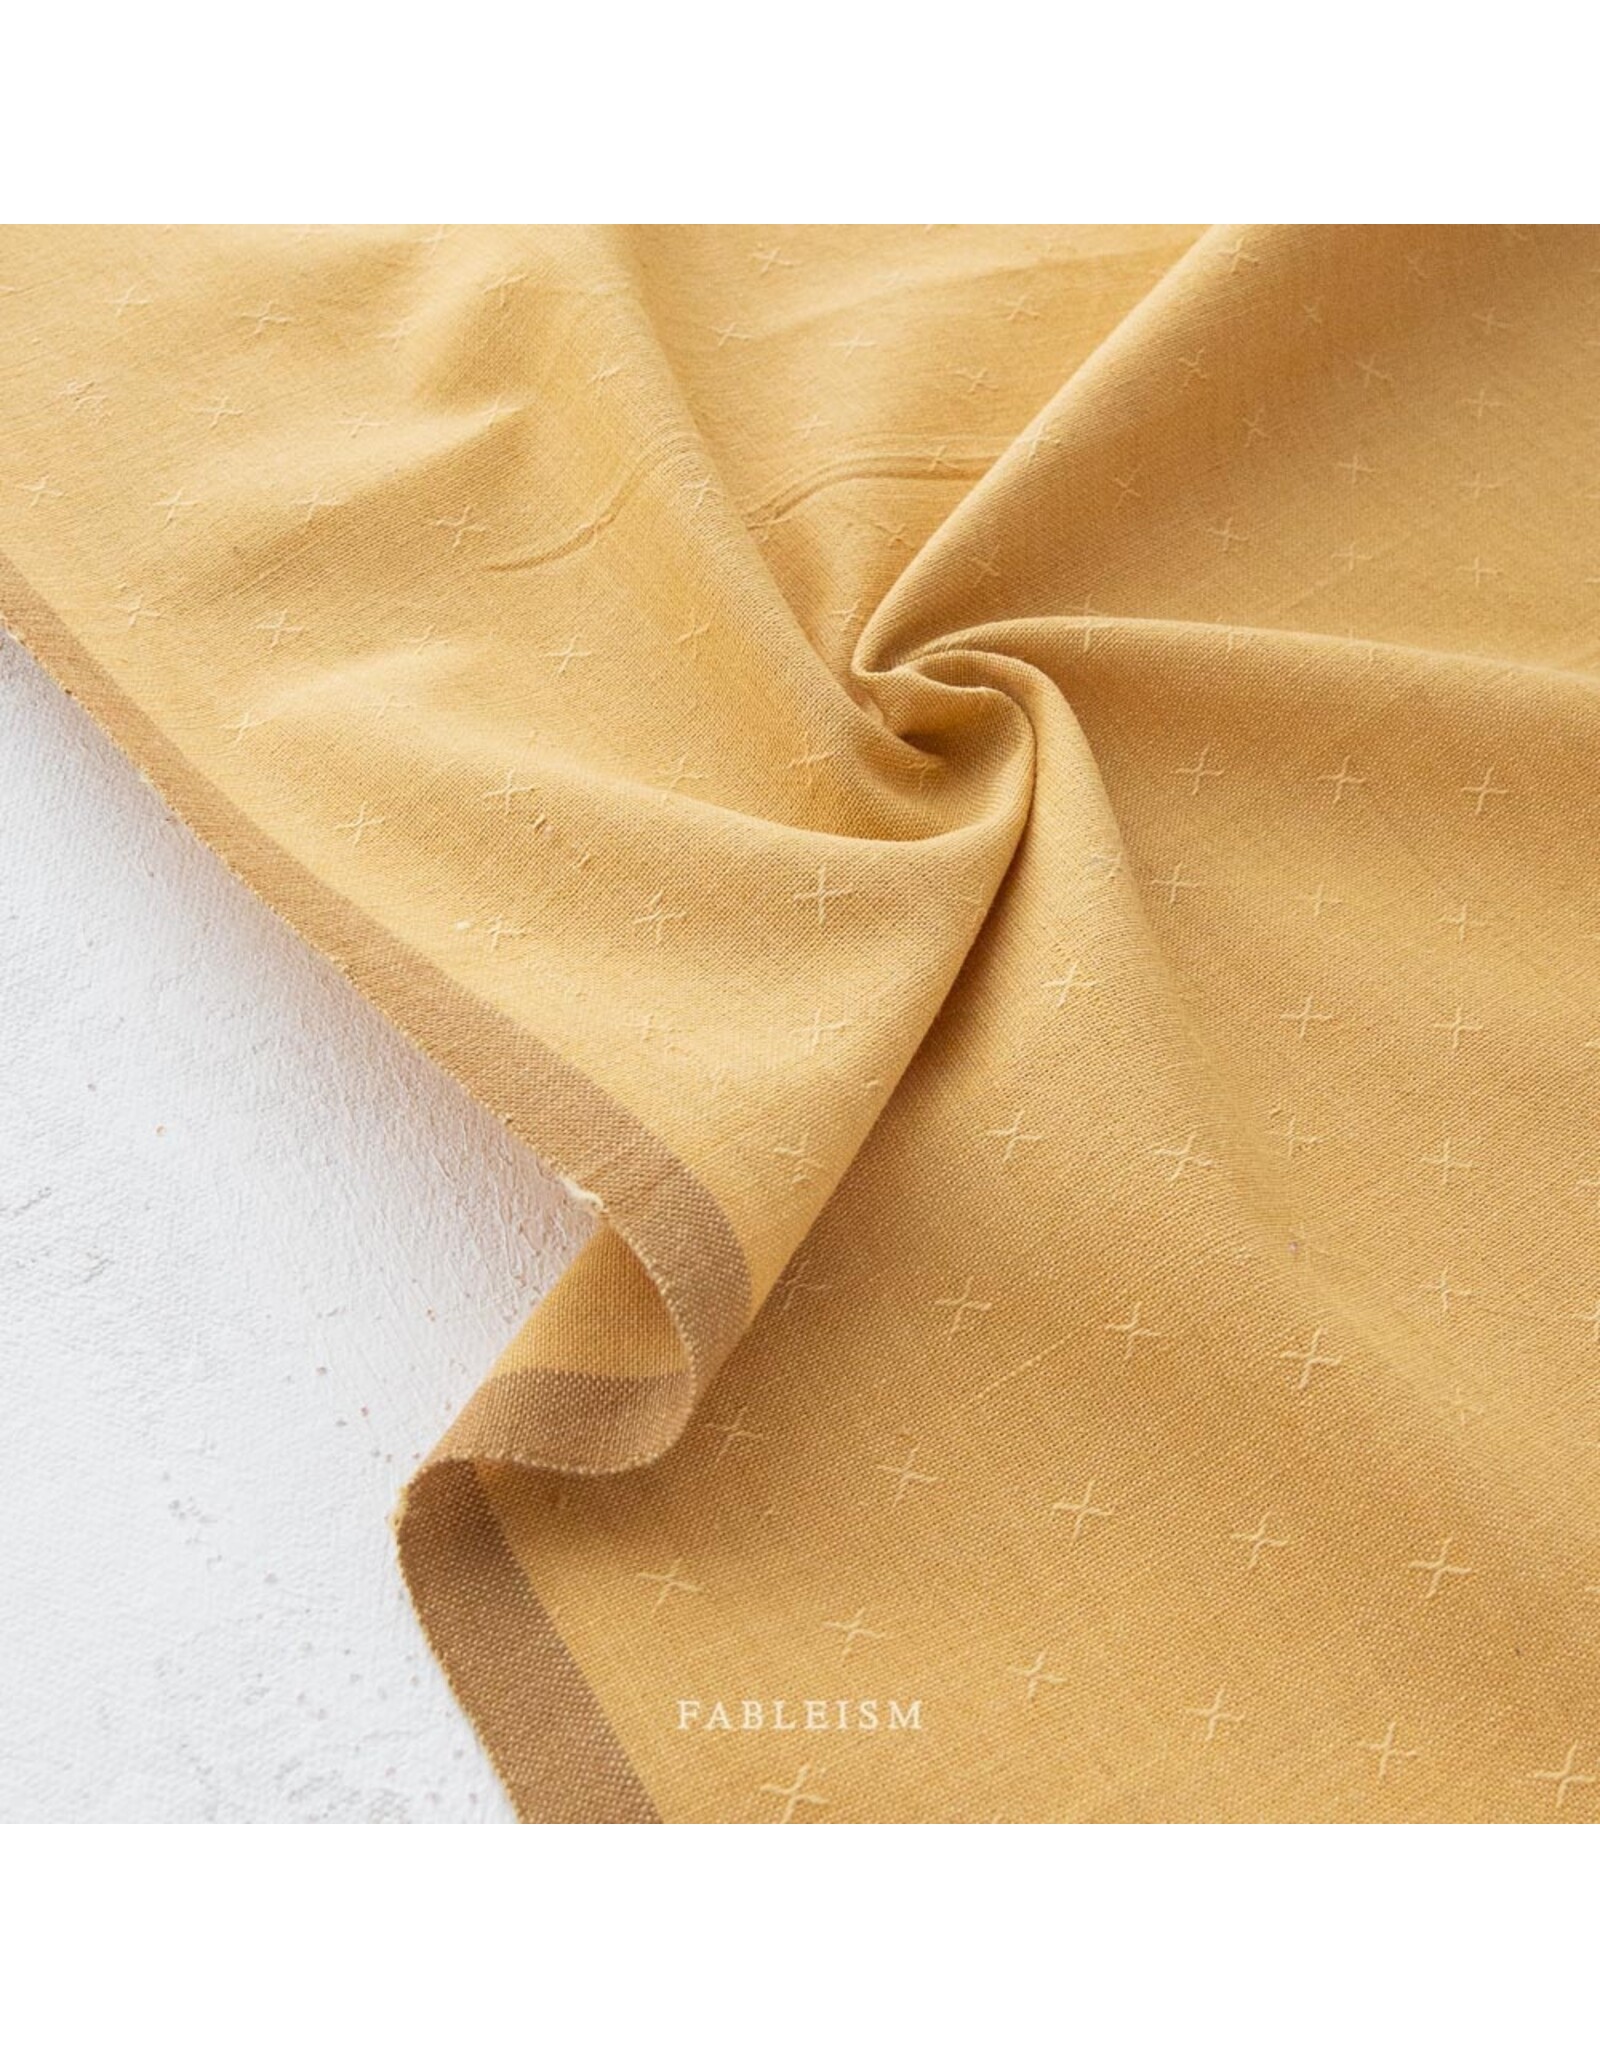 Fableism Sprout Wovens, Chamomile, Fabric Half-Yards